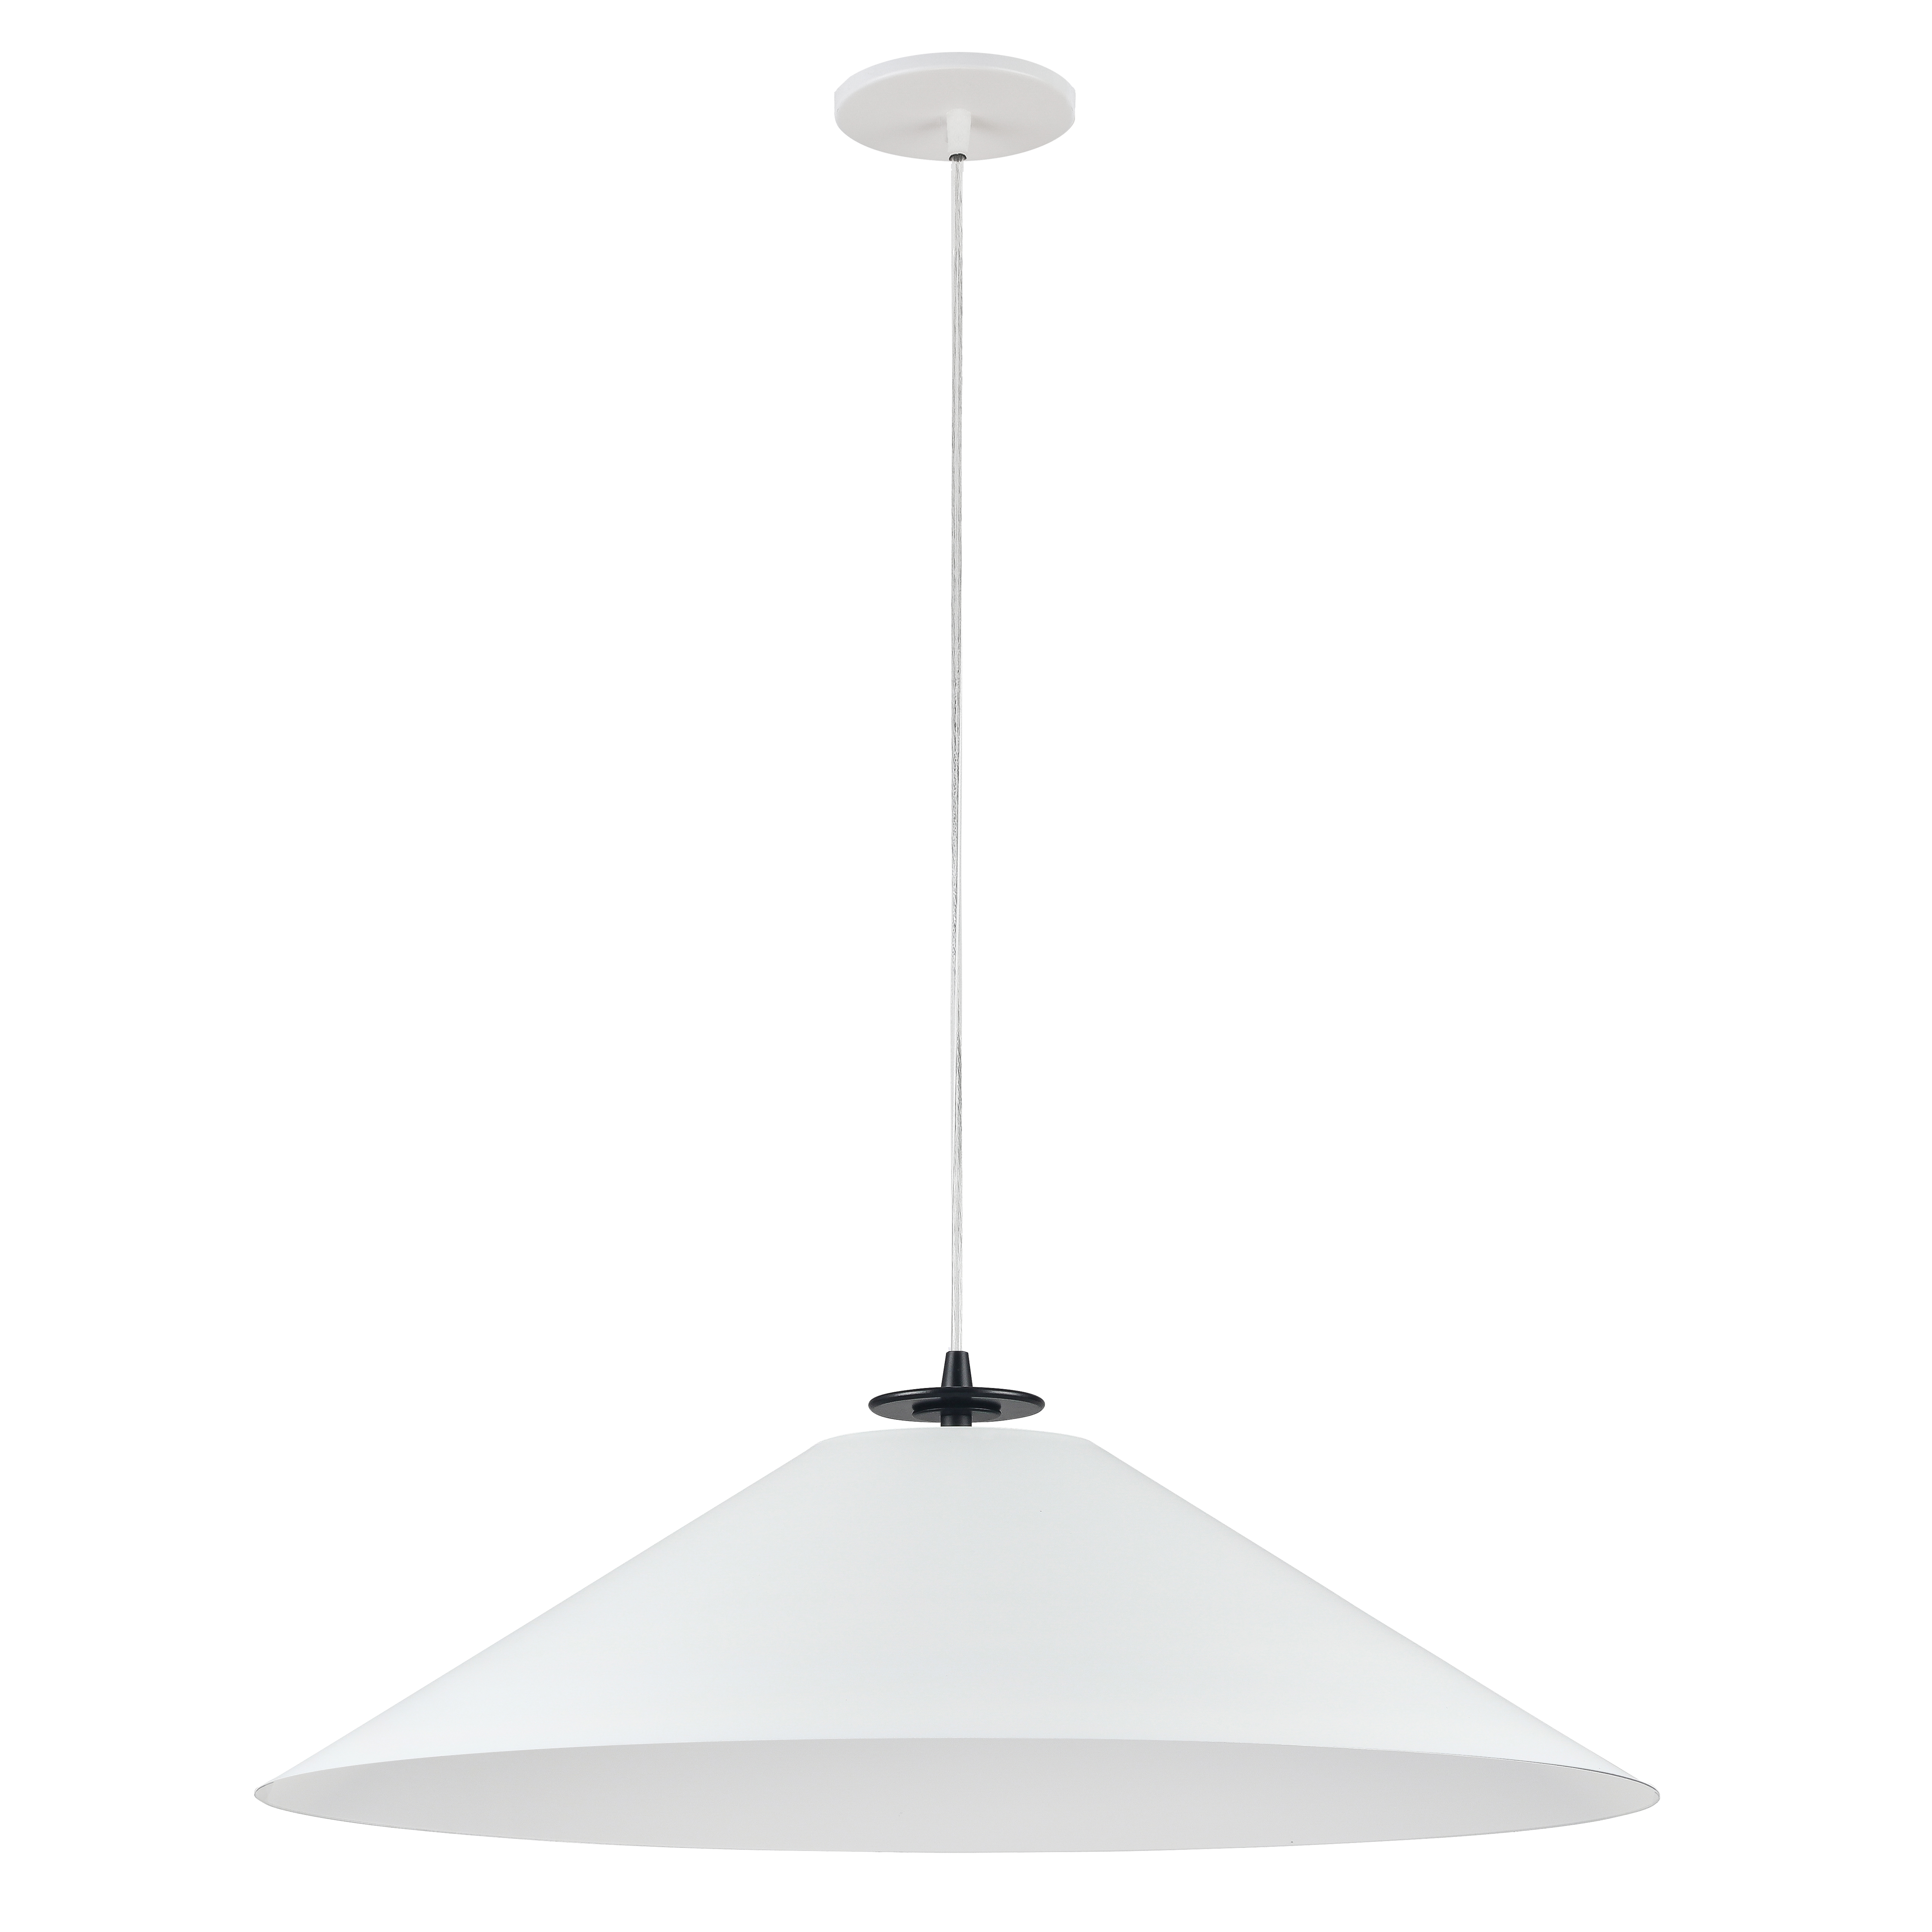 Clean and contemporary  that's the appeal of the Prudence family of lighting. Its unfussy design refines the classic tapered drum shape with a contemporary allure. The simple drop leads to an all metal construction, with part of the frame visible above the elegantly tapered shade. It's a curved detail that discretely adds visual interest to the sleek lines of the overall design. Prudence lighting adds a welcome presence that will enhance your stylish kitchen or dinette, and sets a fashionable tone in your foyer.